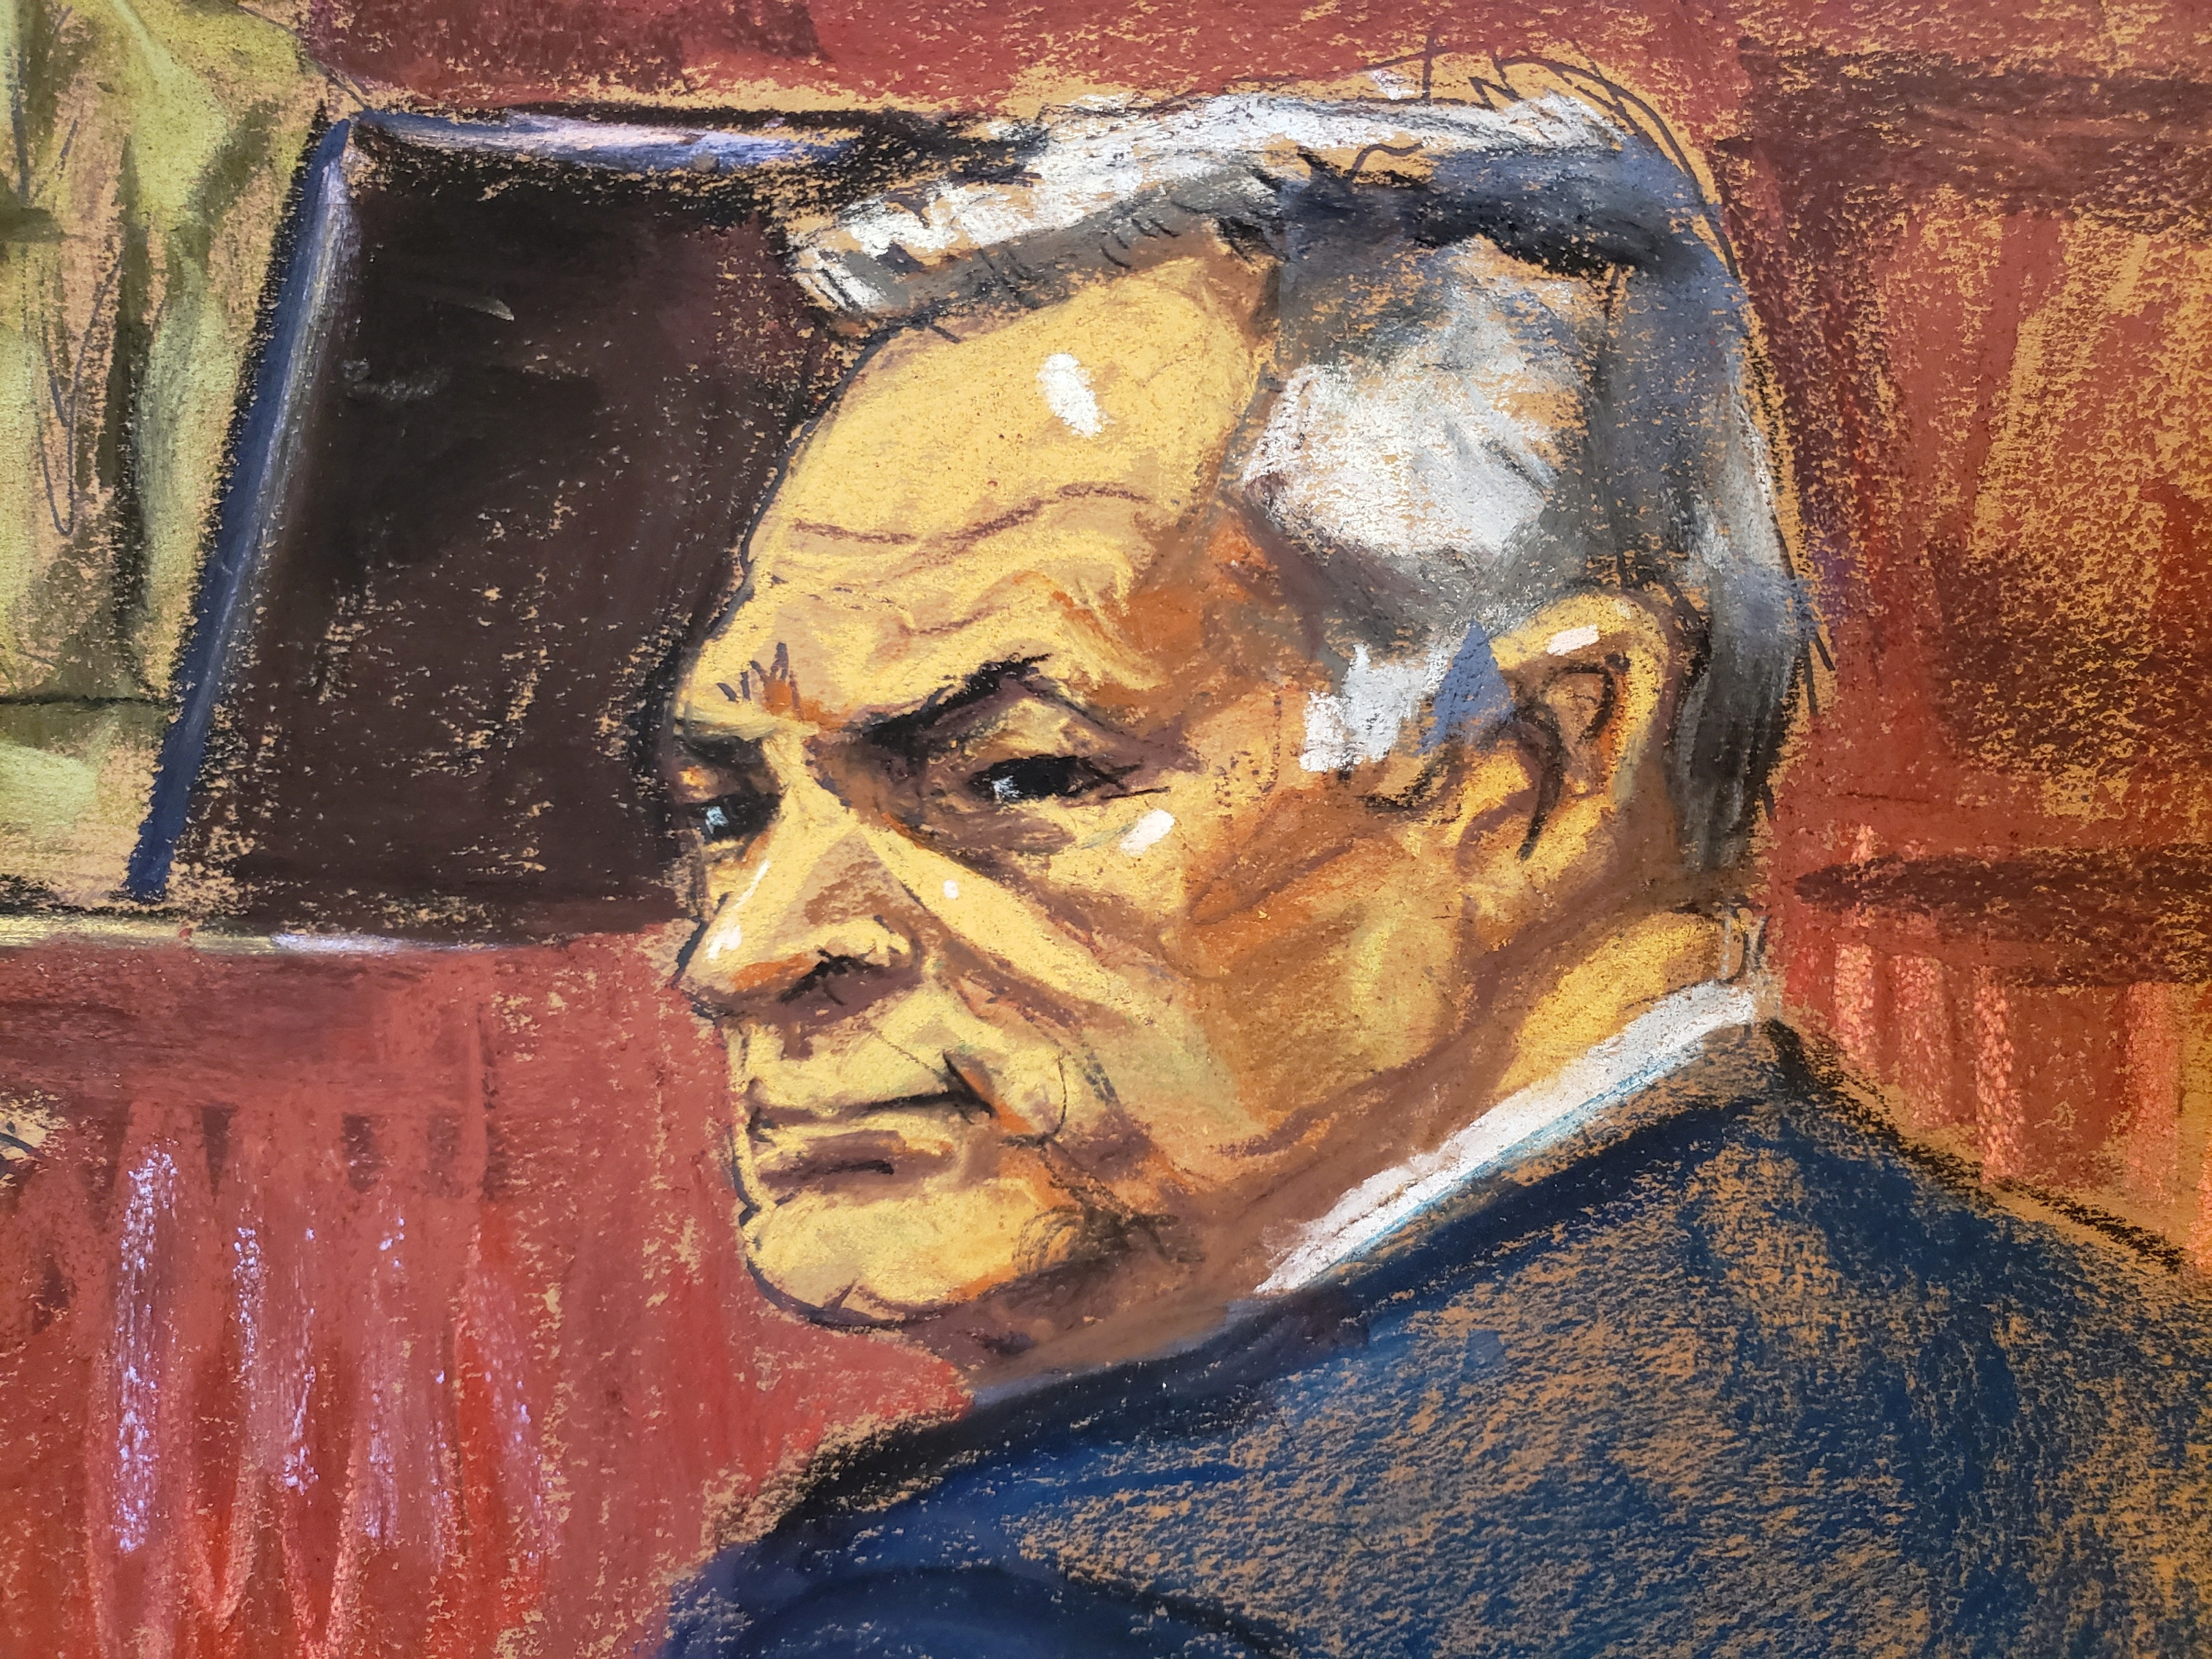 Mexico's former Public Security Minister Genaro Garcia Luna listens during his trial on charges that he accepted millions of dollars to protect the powerful Sinaloa Cartel, once run by imprisoned drug lord Joaquin "El Chapo" Guzman, at a courthouse in New York City, U.S., February 7, 2023 in this courtroom sketch. REUTERS/Jane Rosenberg